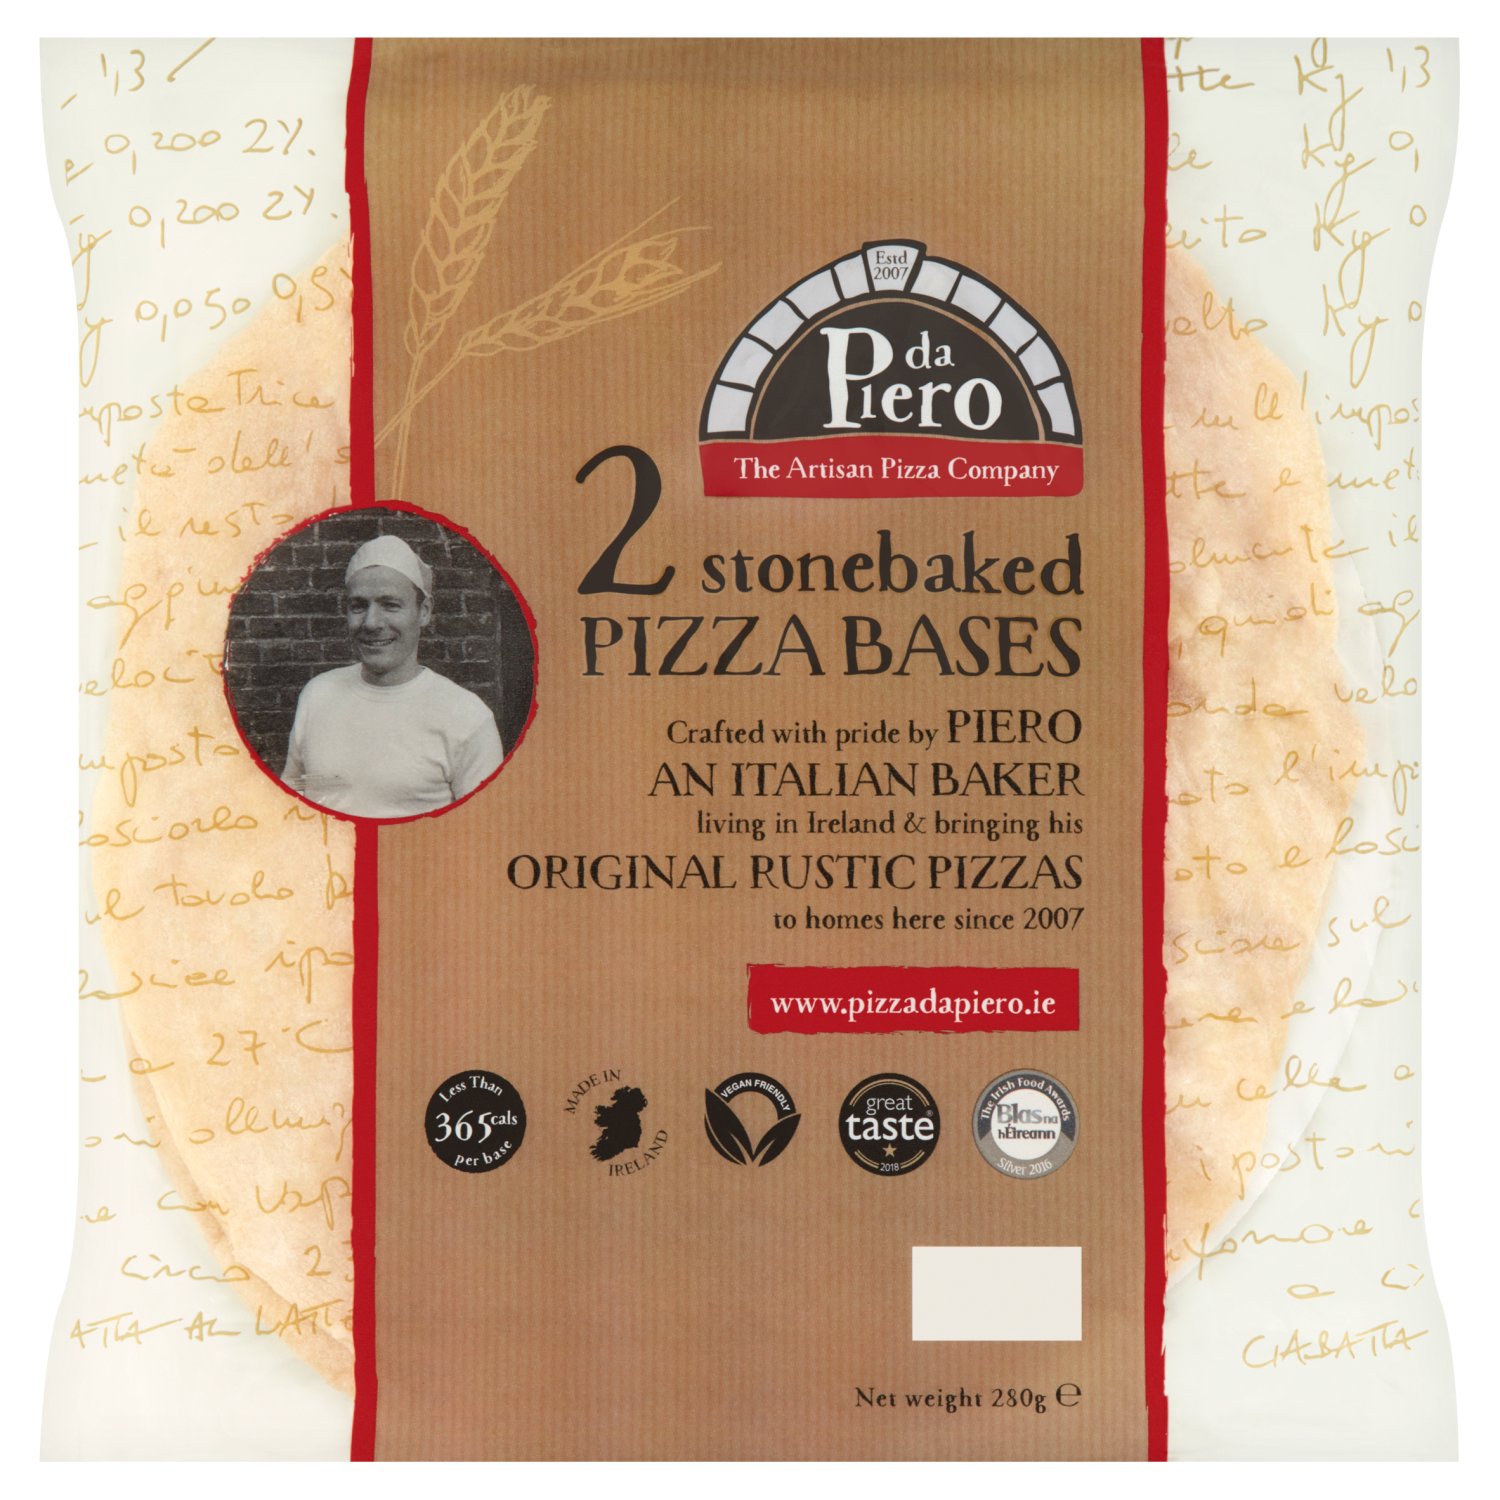 Crafted with pride by Piero an Italian Baker living in Ireland & bringing his Original Rustic Pizzas to homes here since 2007